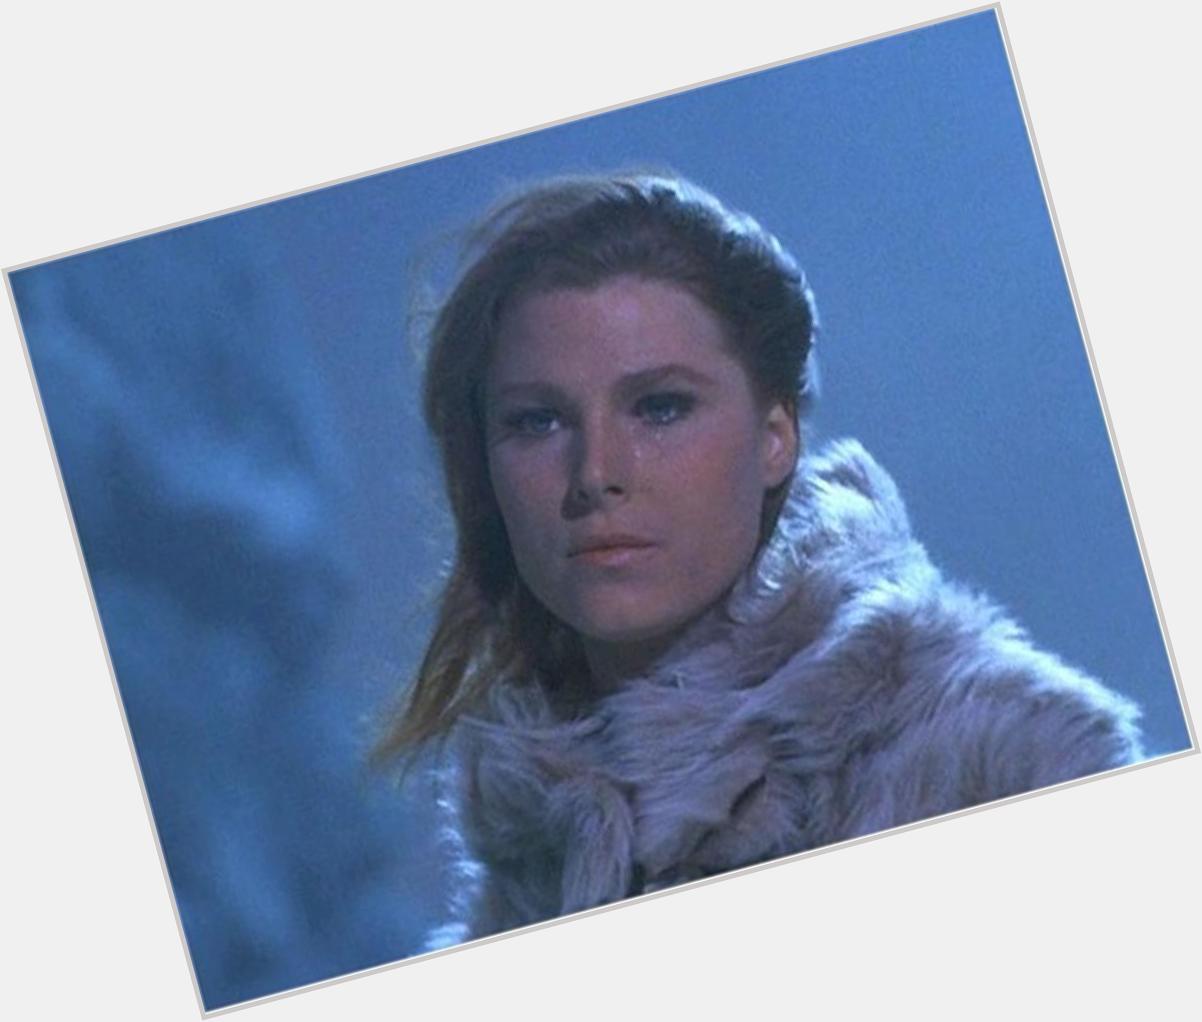 Happy 74th Birthday 2 our fave the tremendously talented Mariette Hartley!  